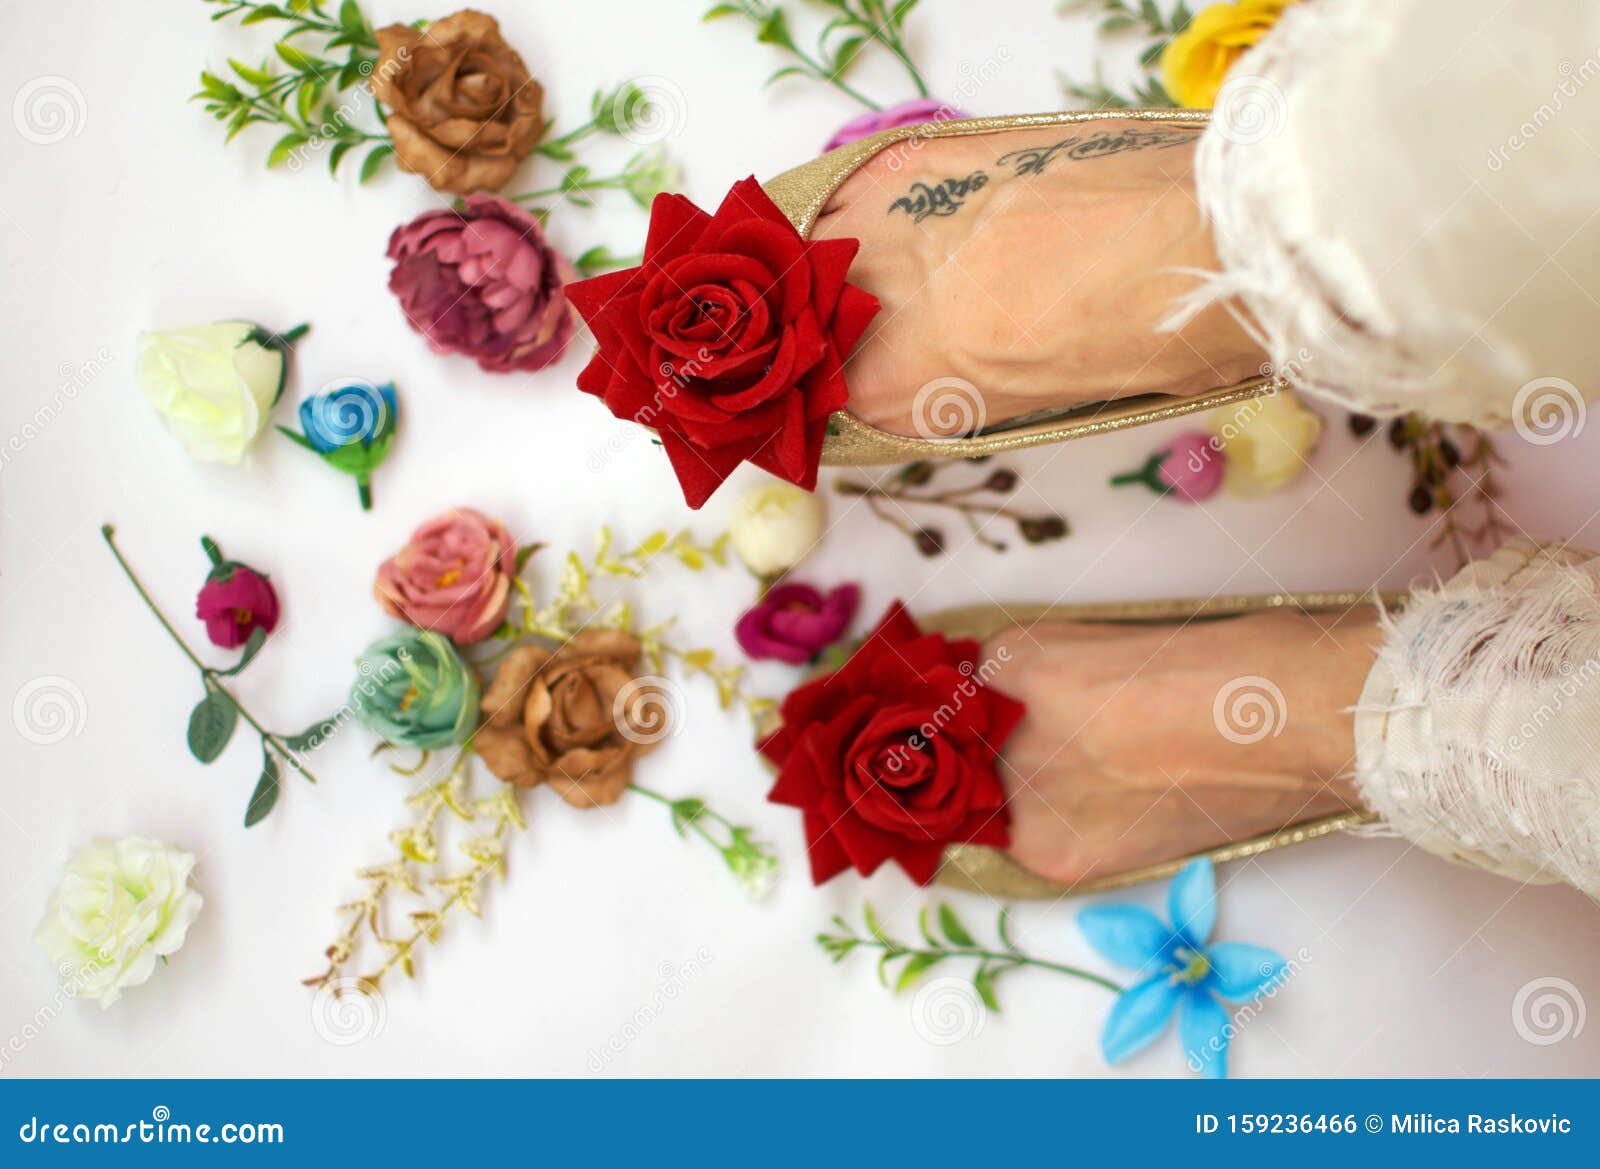 Red Roses on the Top of the Shoes Stock Photo - Image of shoe, rose ...